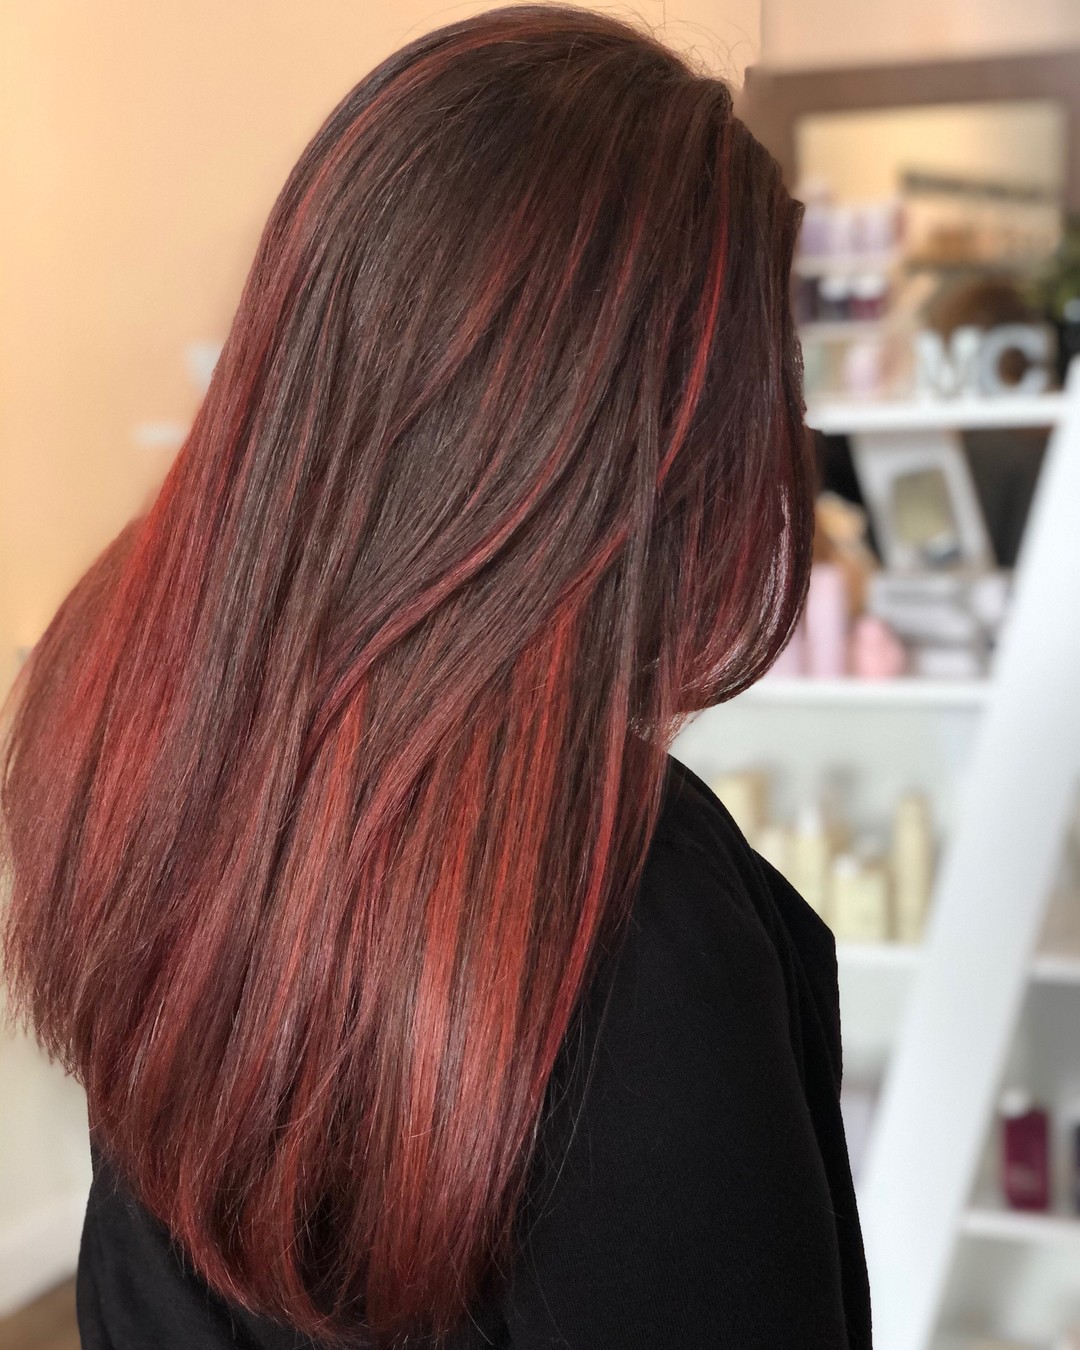 Straight Brown Hair with Metallic Red Hues